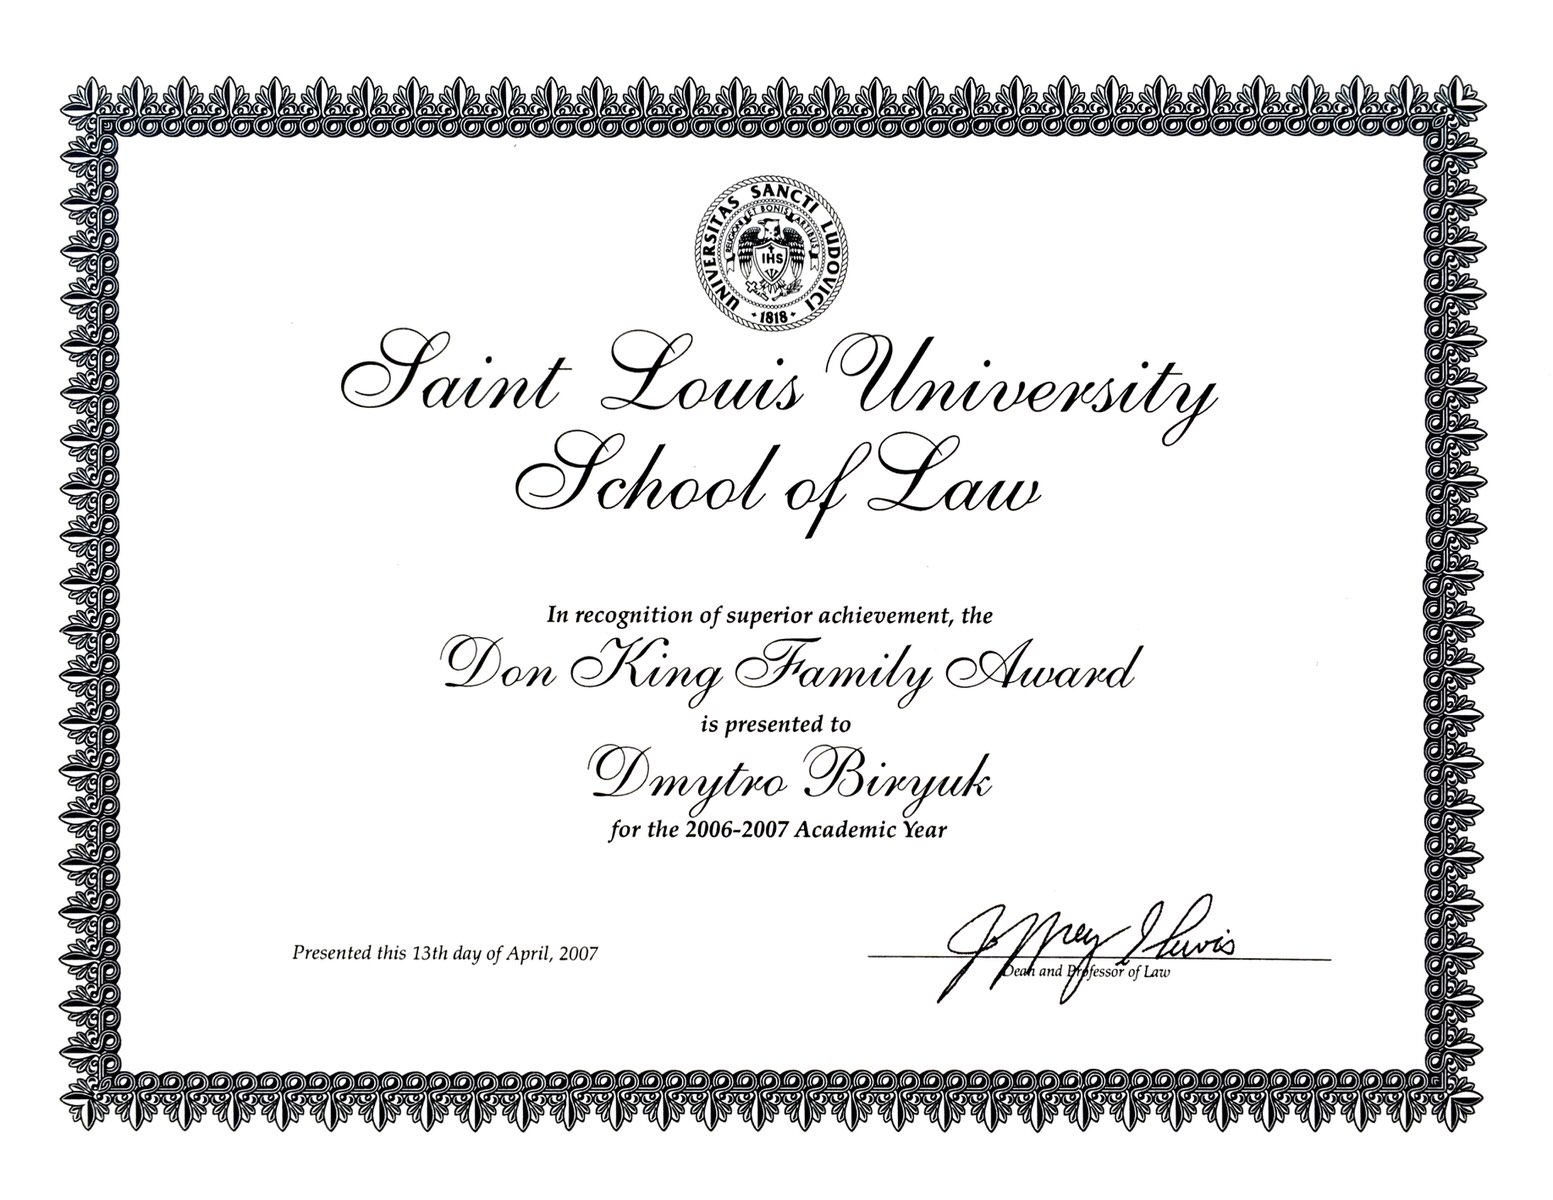 Photo of Academic Award Certificate of the Saint Louis University School of Law, St. Louis, MO, US